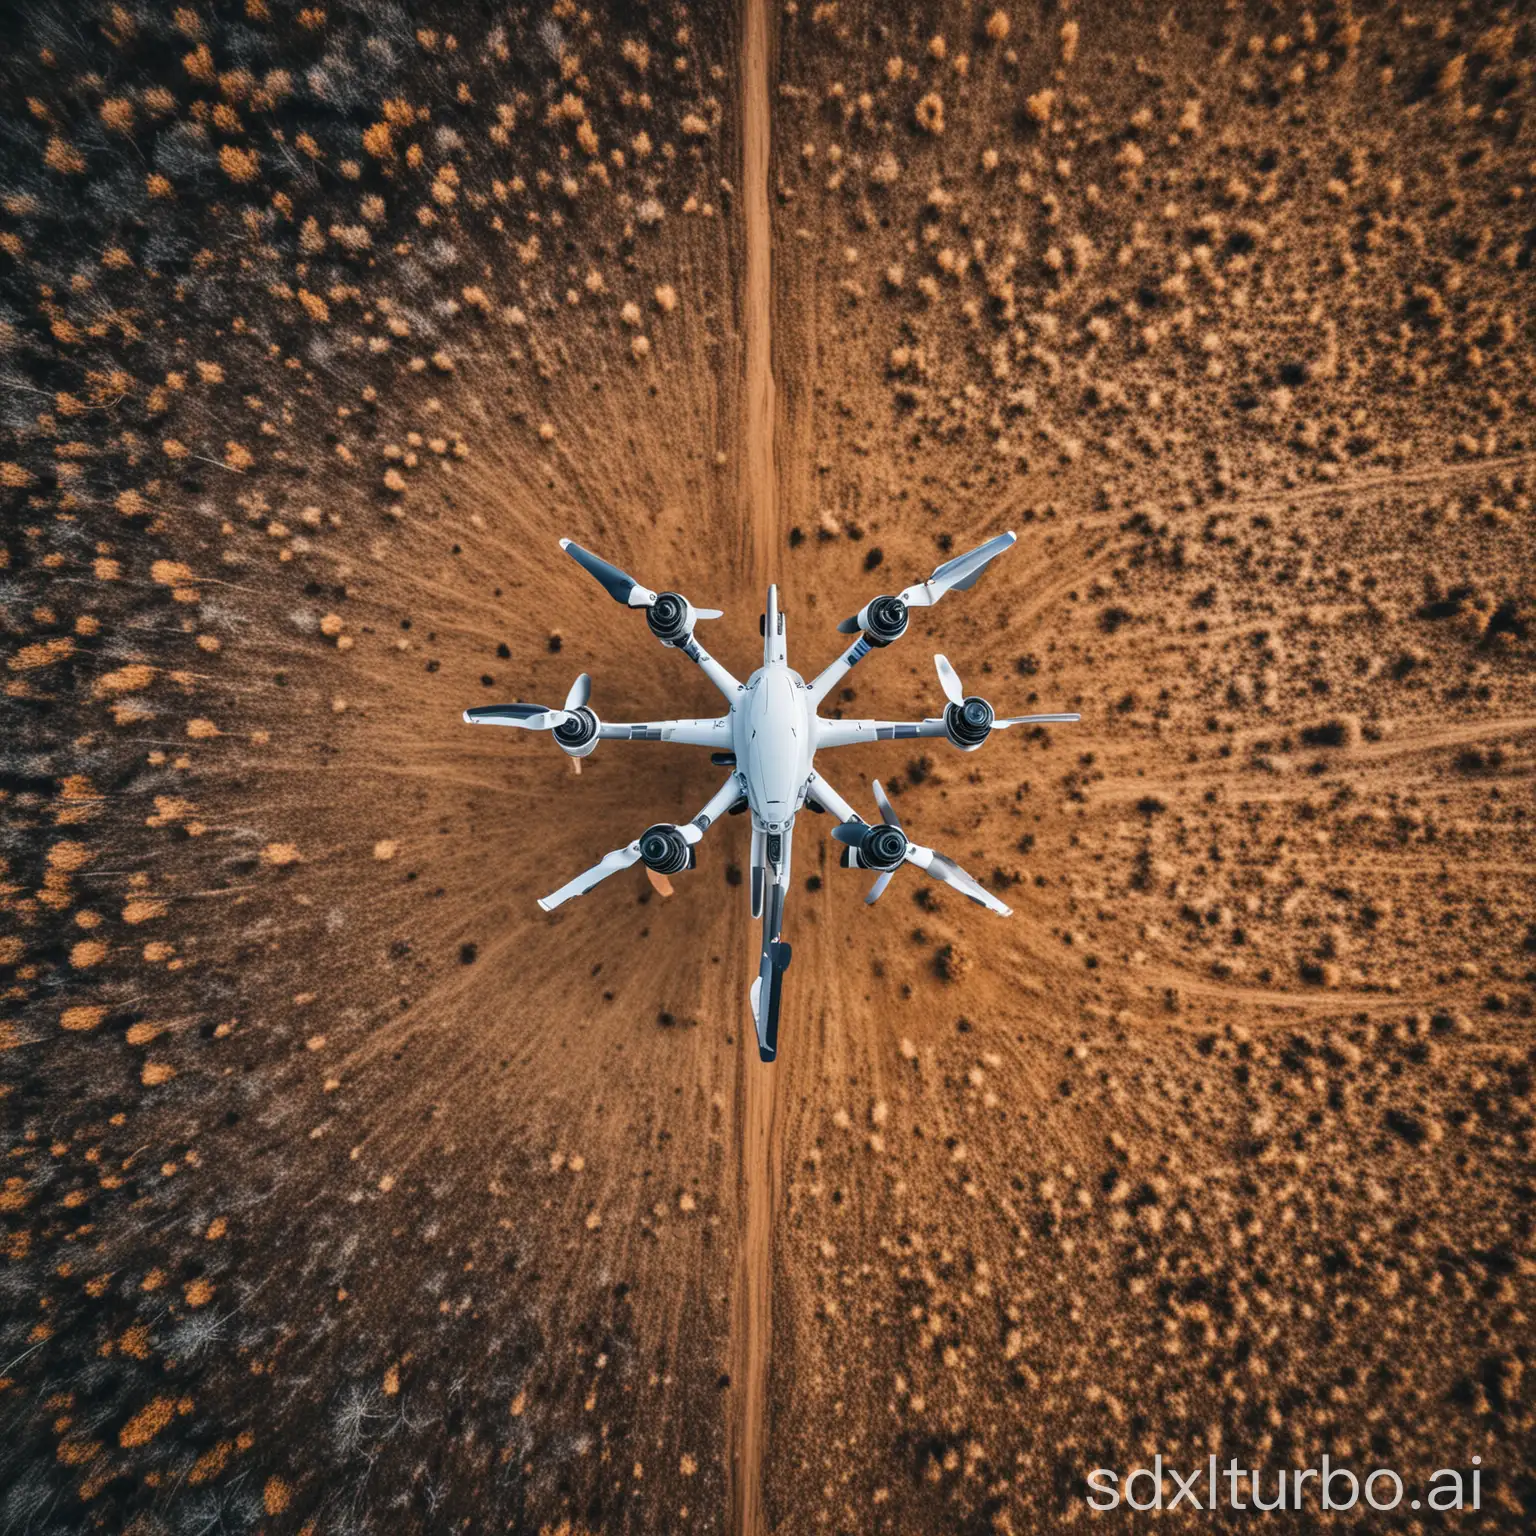 calls for your unique take on drone photography.